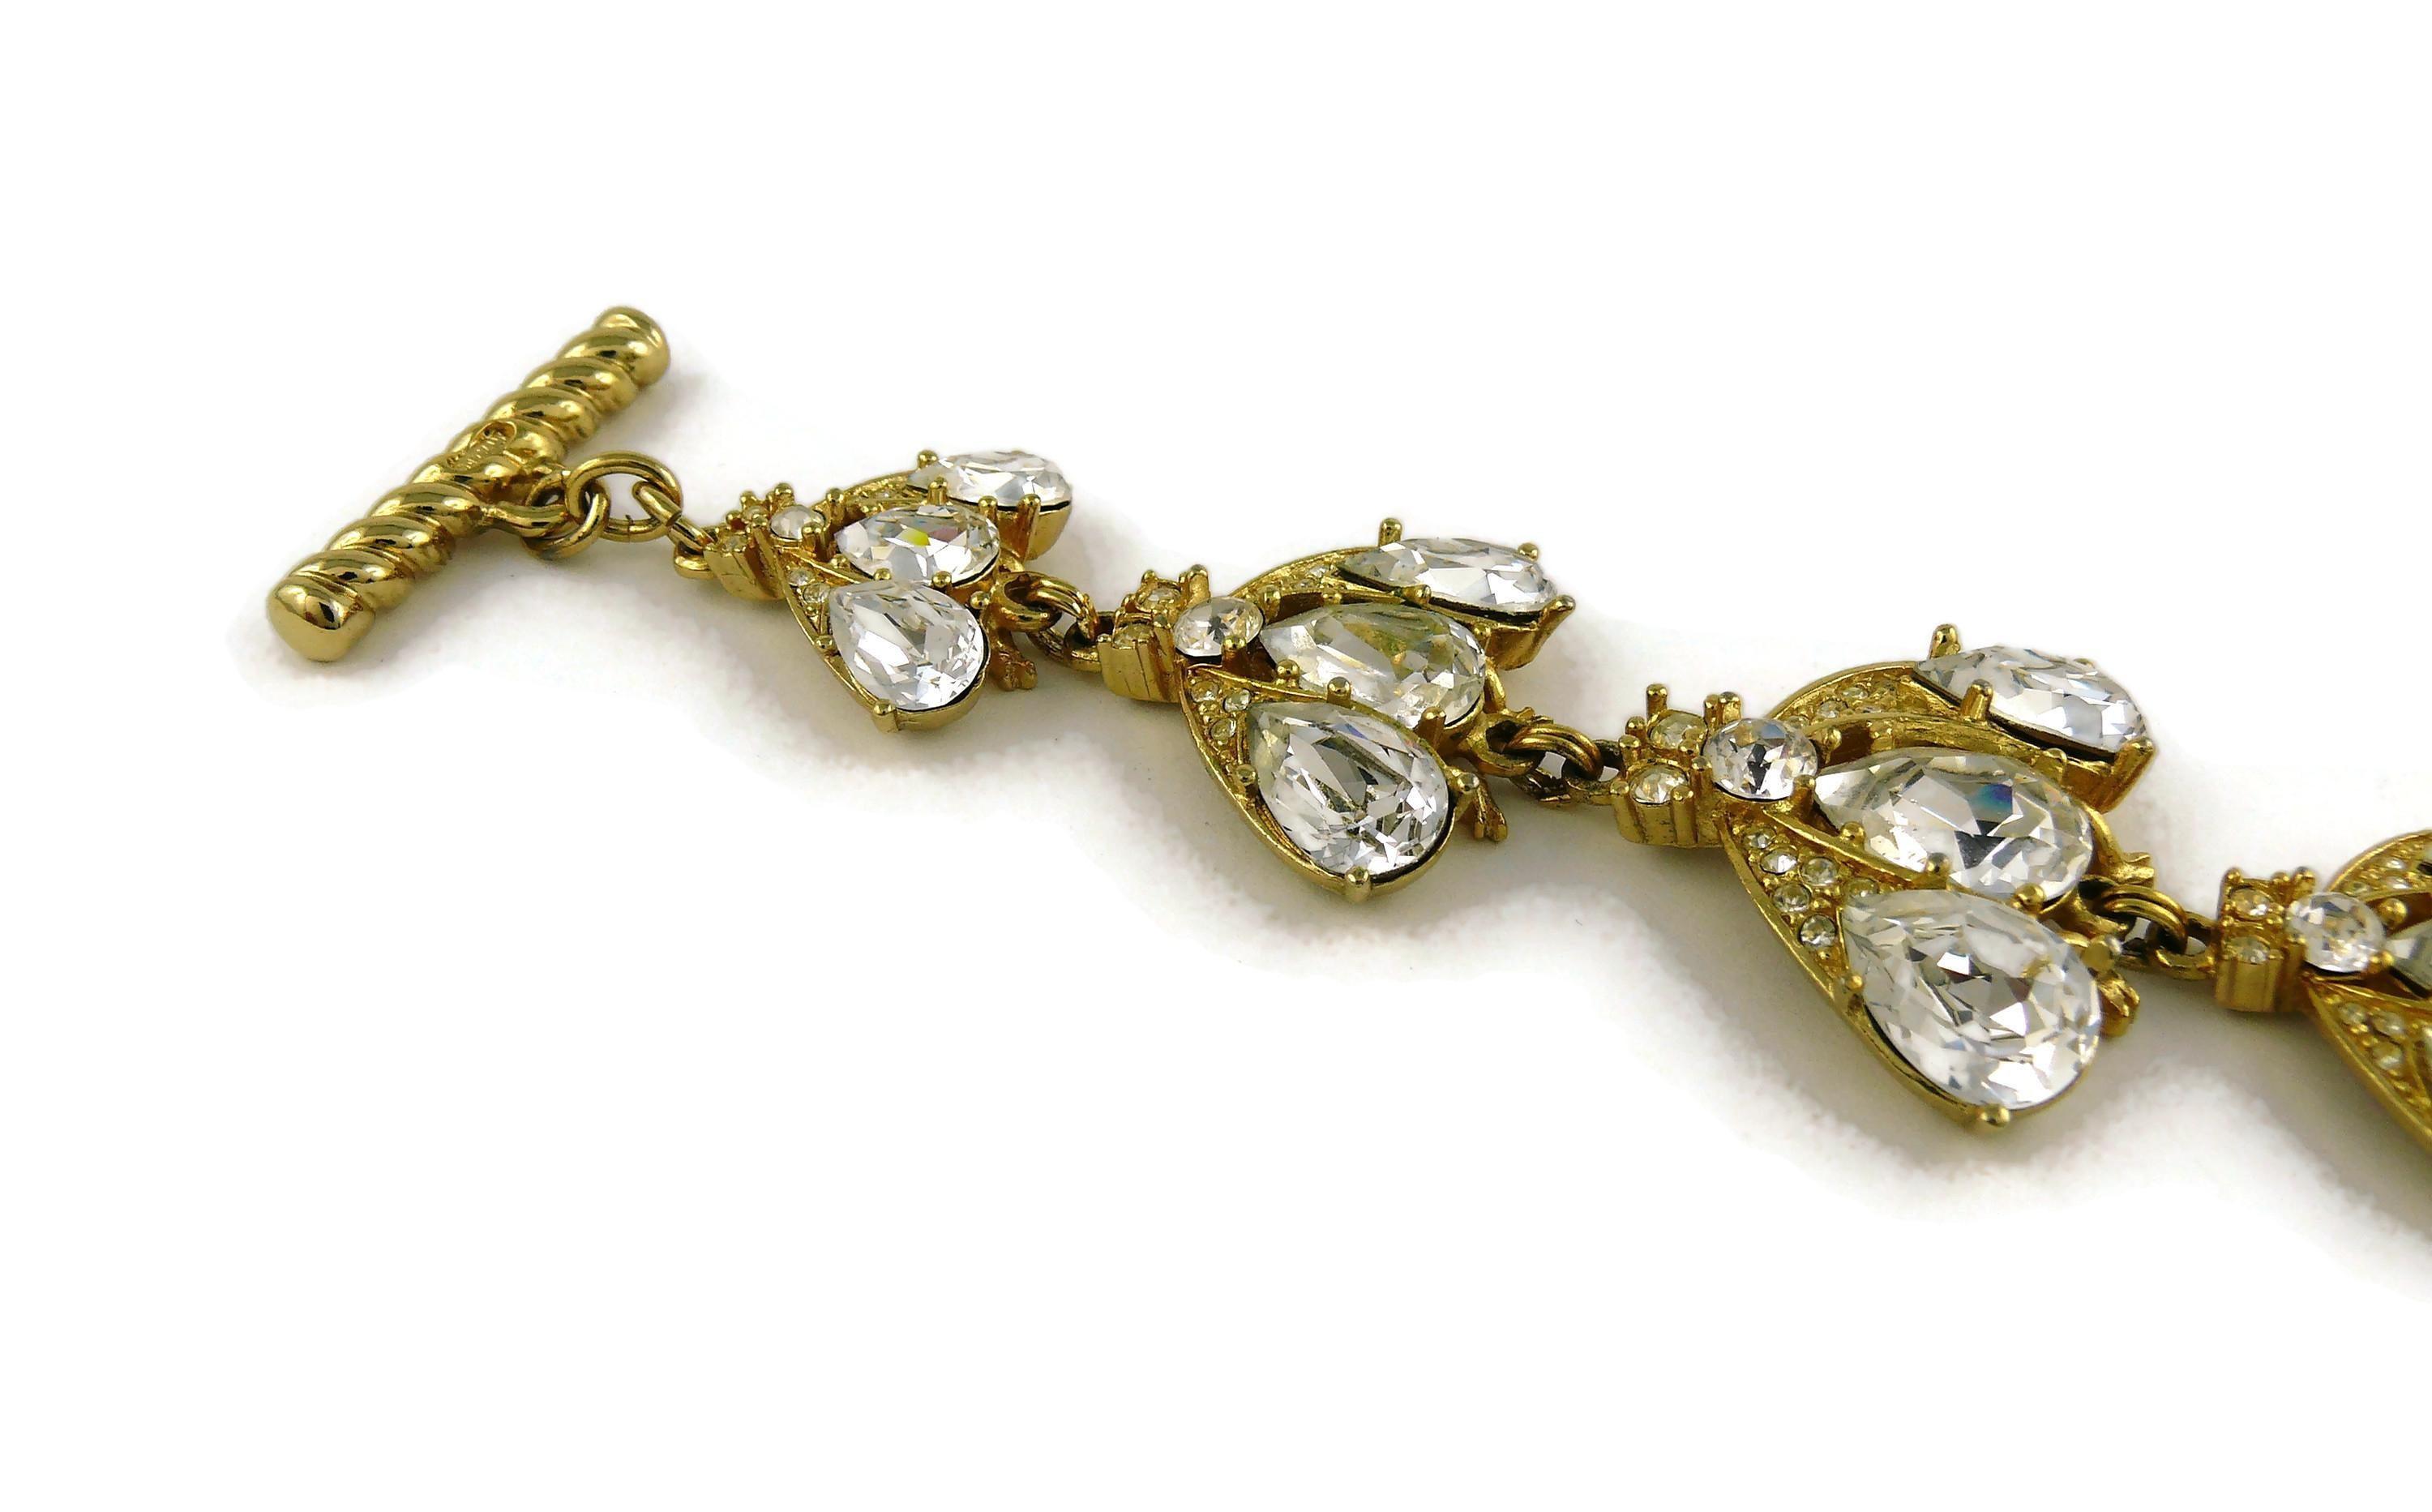 Women's Christian Dior Boutique Vintage Iconic Jewelled Bee Bracelet